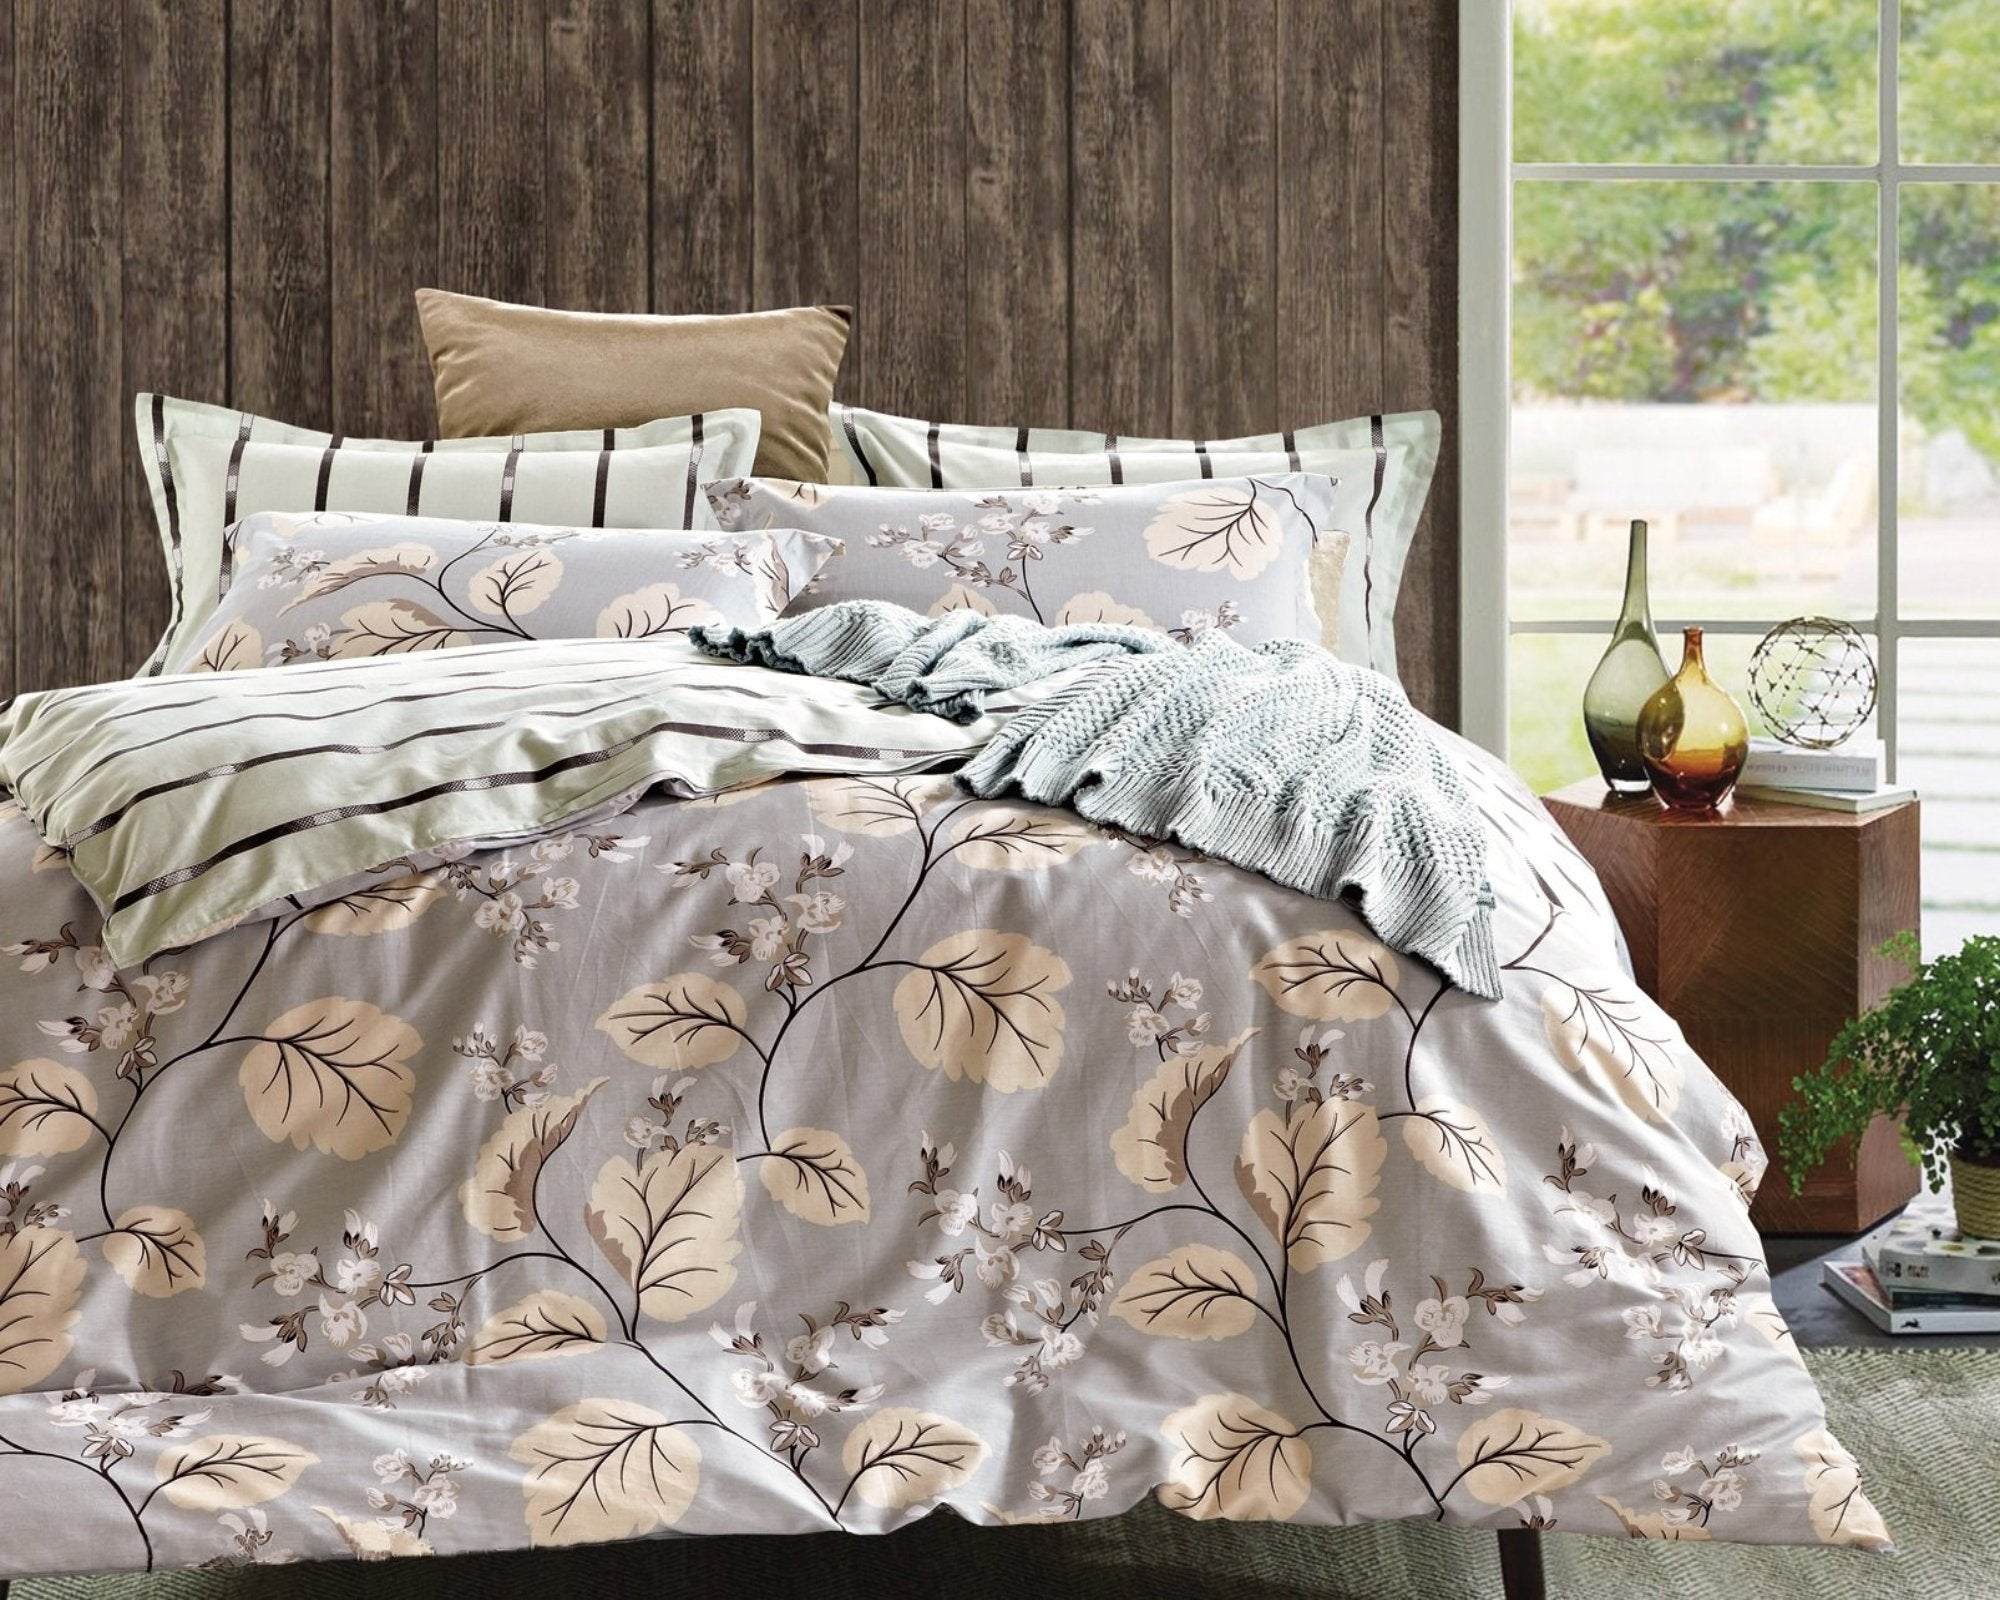 milky grey floral cotton duvet cover set, striped print at the reverse side.